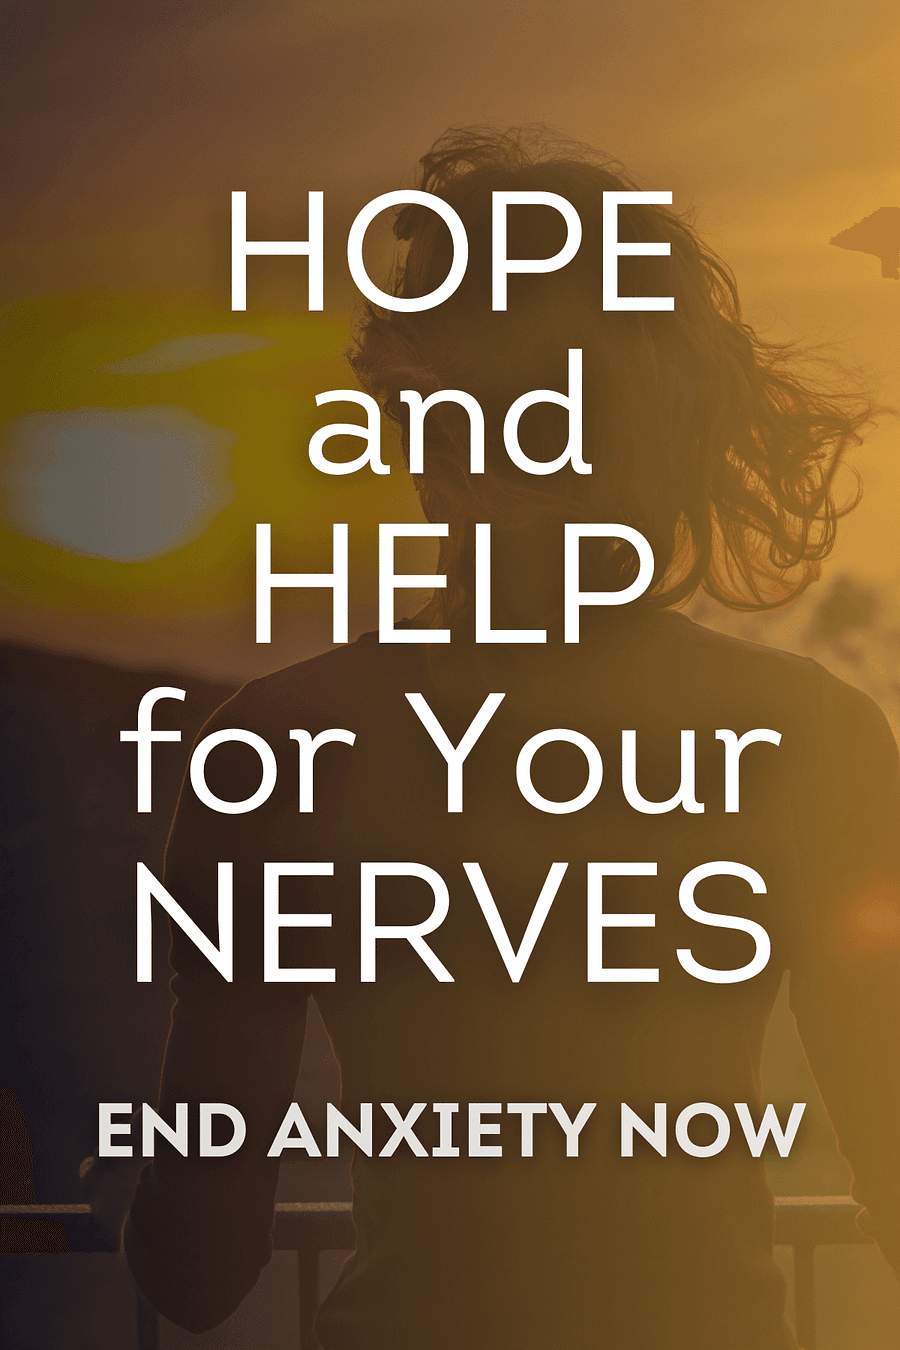 Hope and Help for Your Nerves by Claire Weekes - Book Summary